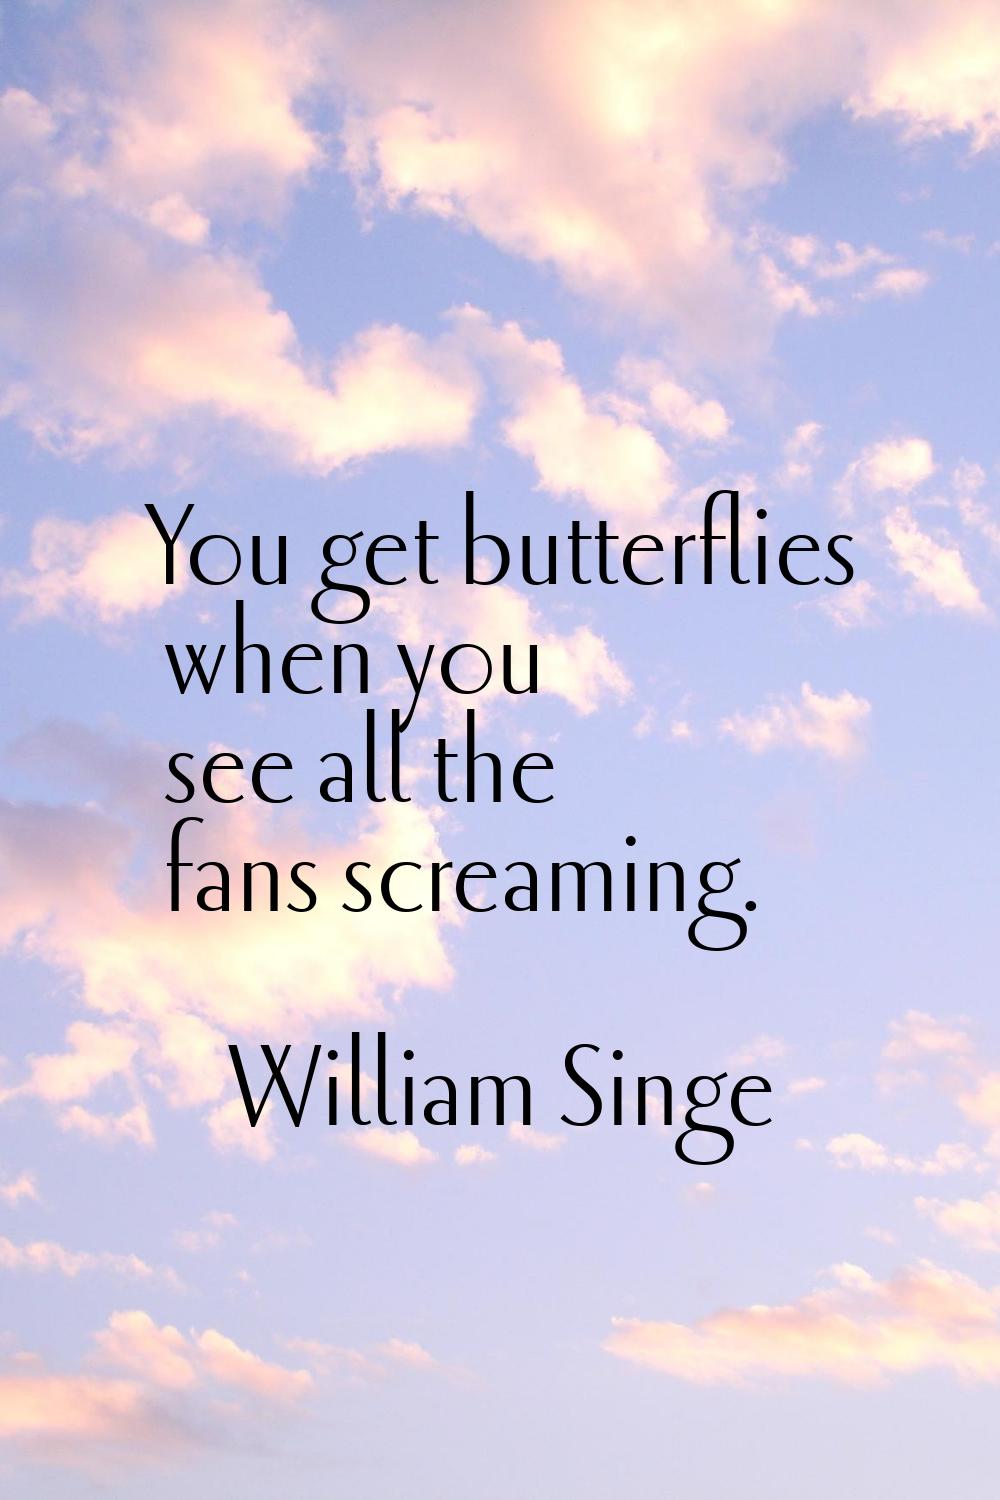 You get butterflies when you see all the fans screaming.